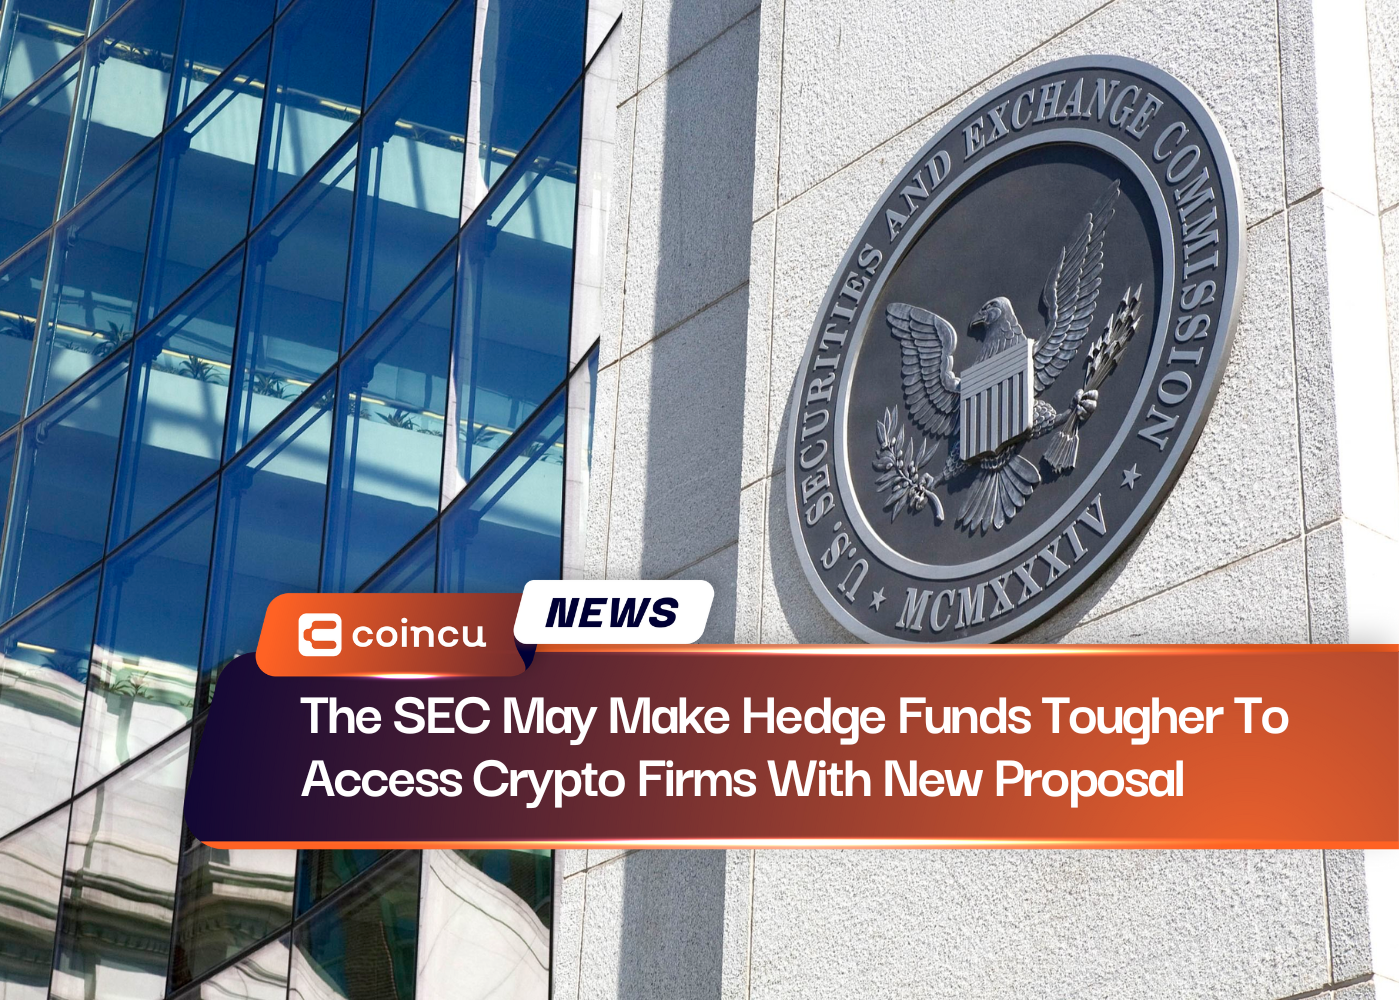 The SEC May Make Hedge Funds Tougher To Access Crypto Firms With New Proposal